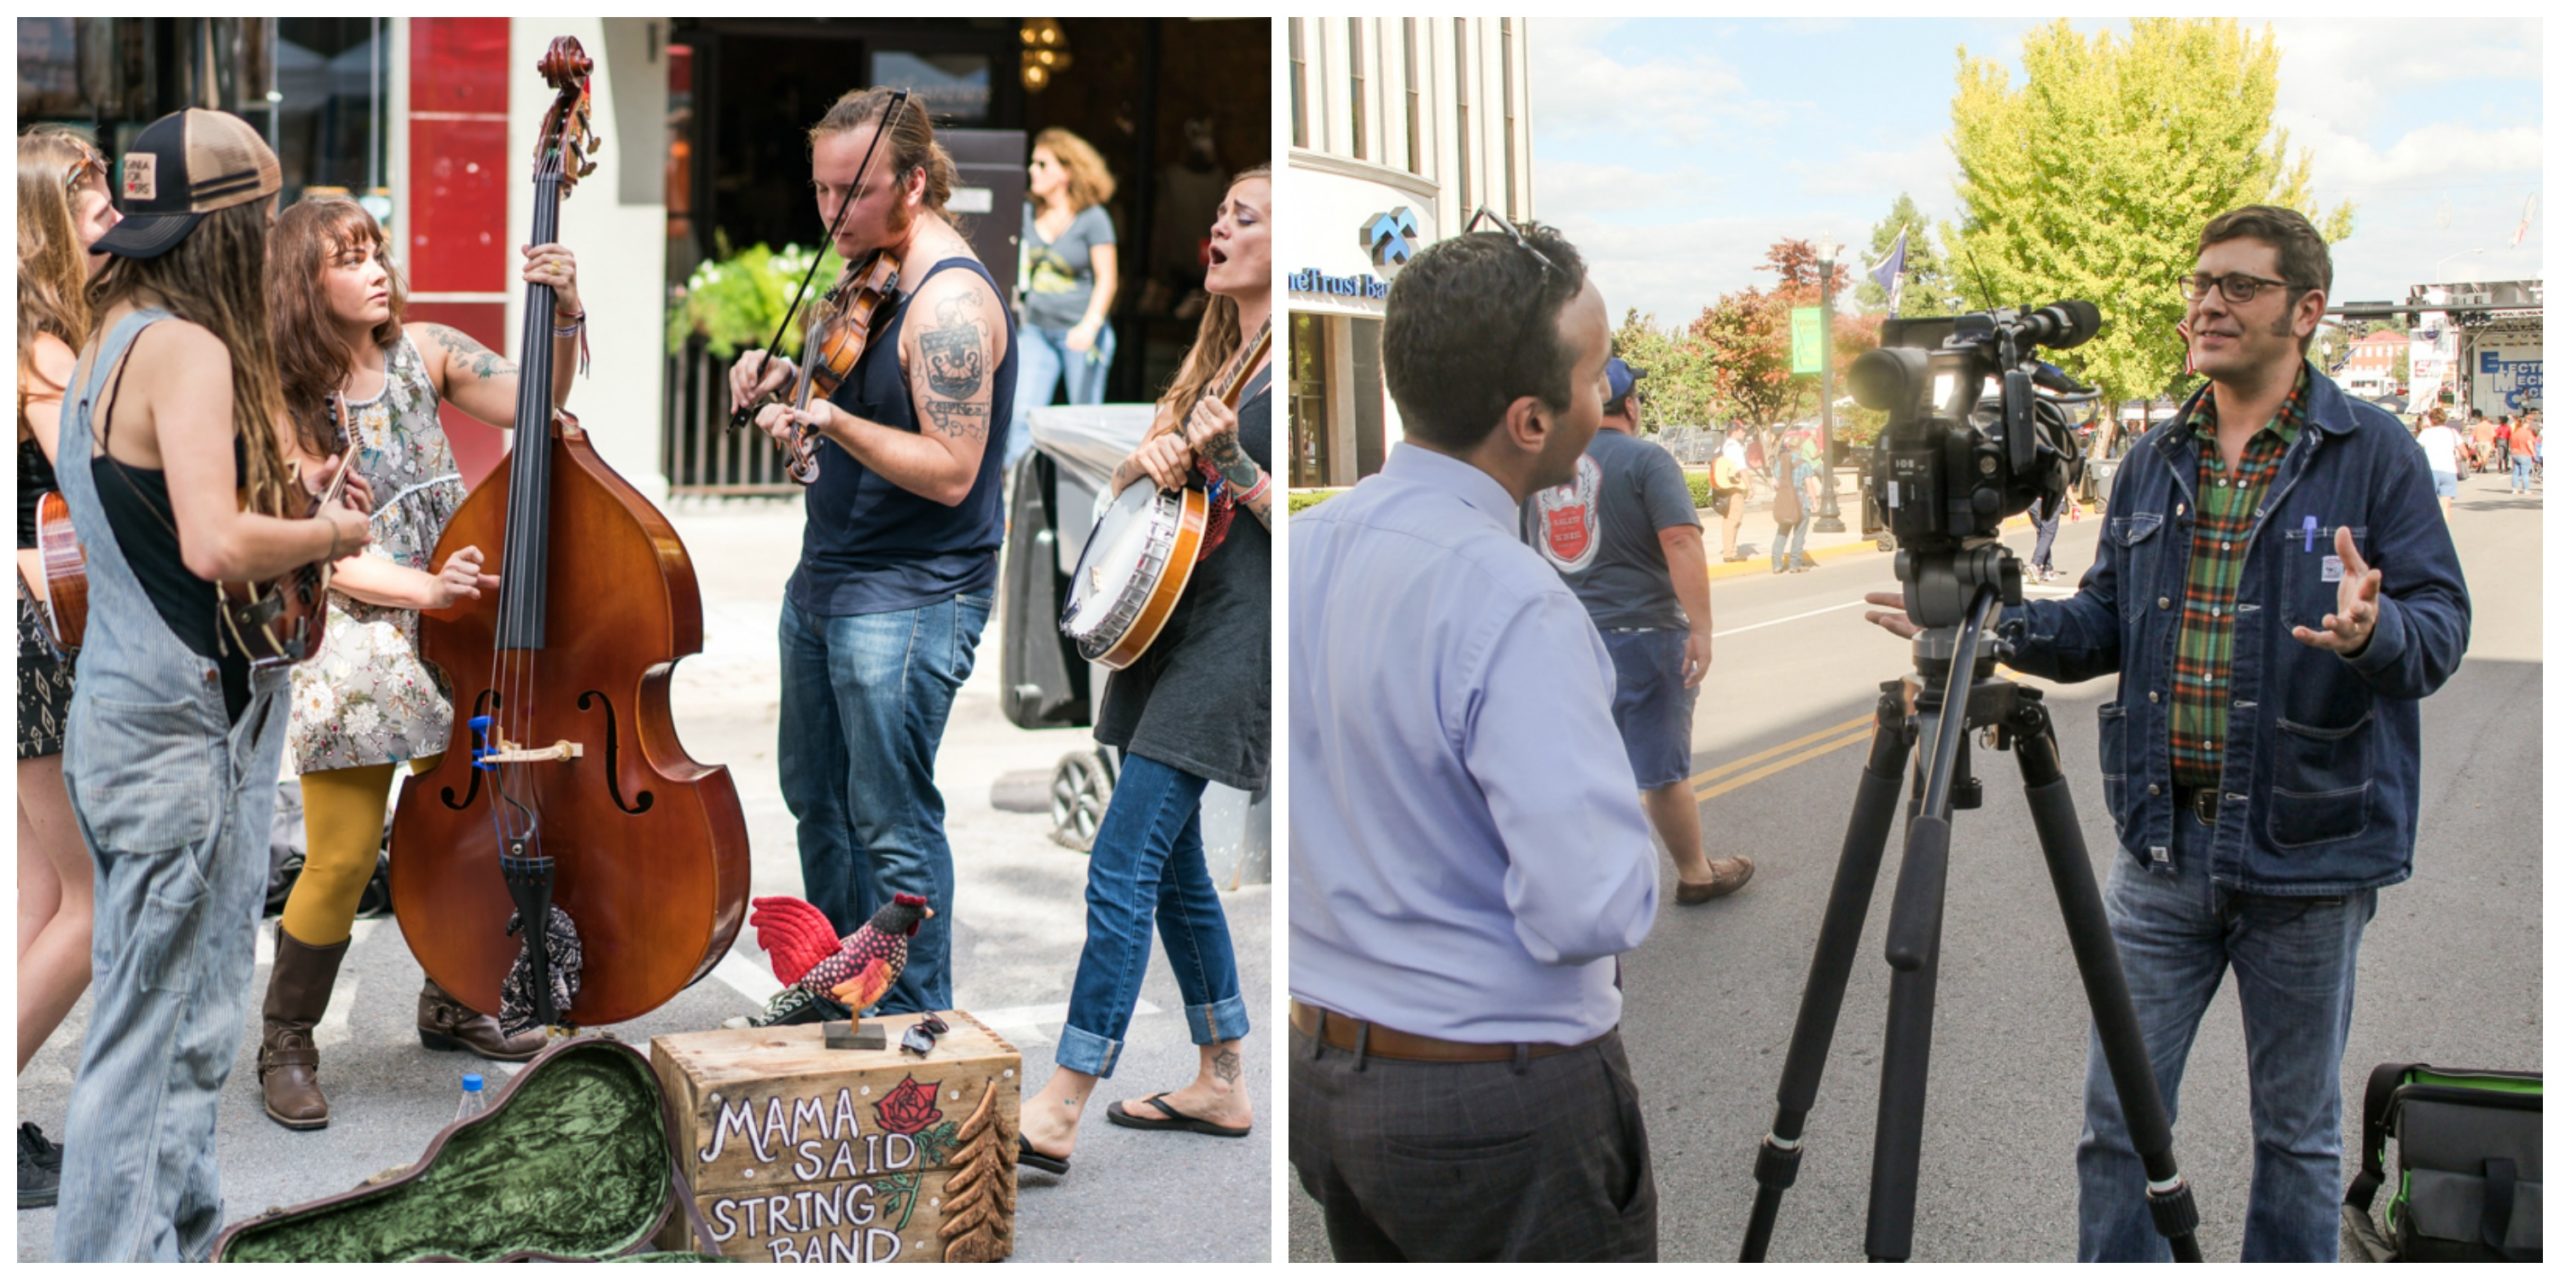 Left image shows the Mama Said String Band set up on the street busking with their case open for tips; right image shows J. P. Parsons talking on camera with a member of PLA Media.